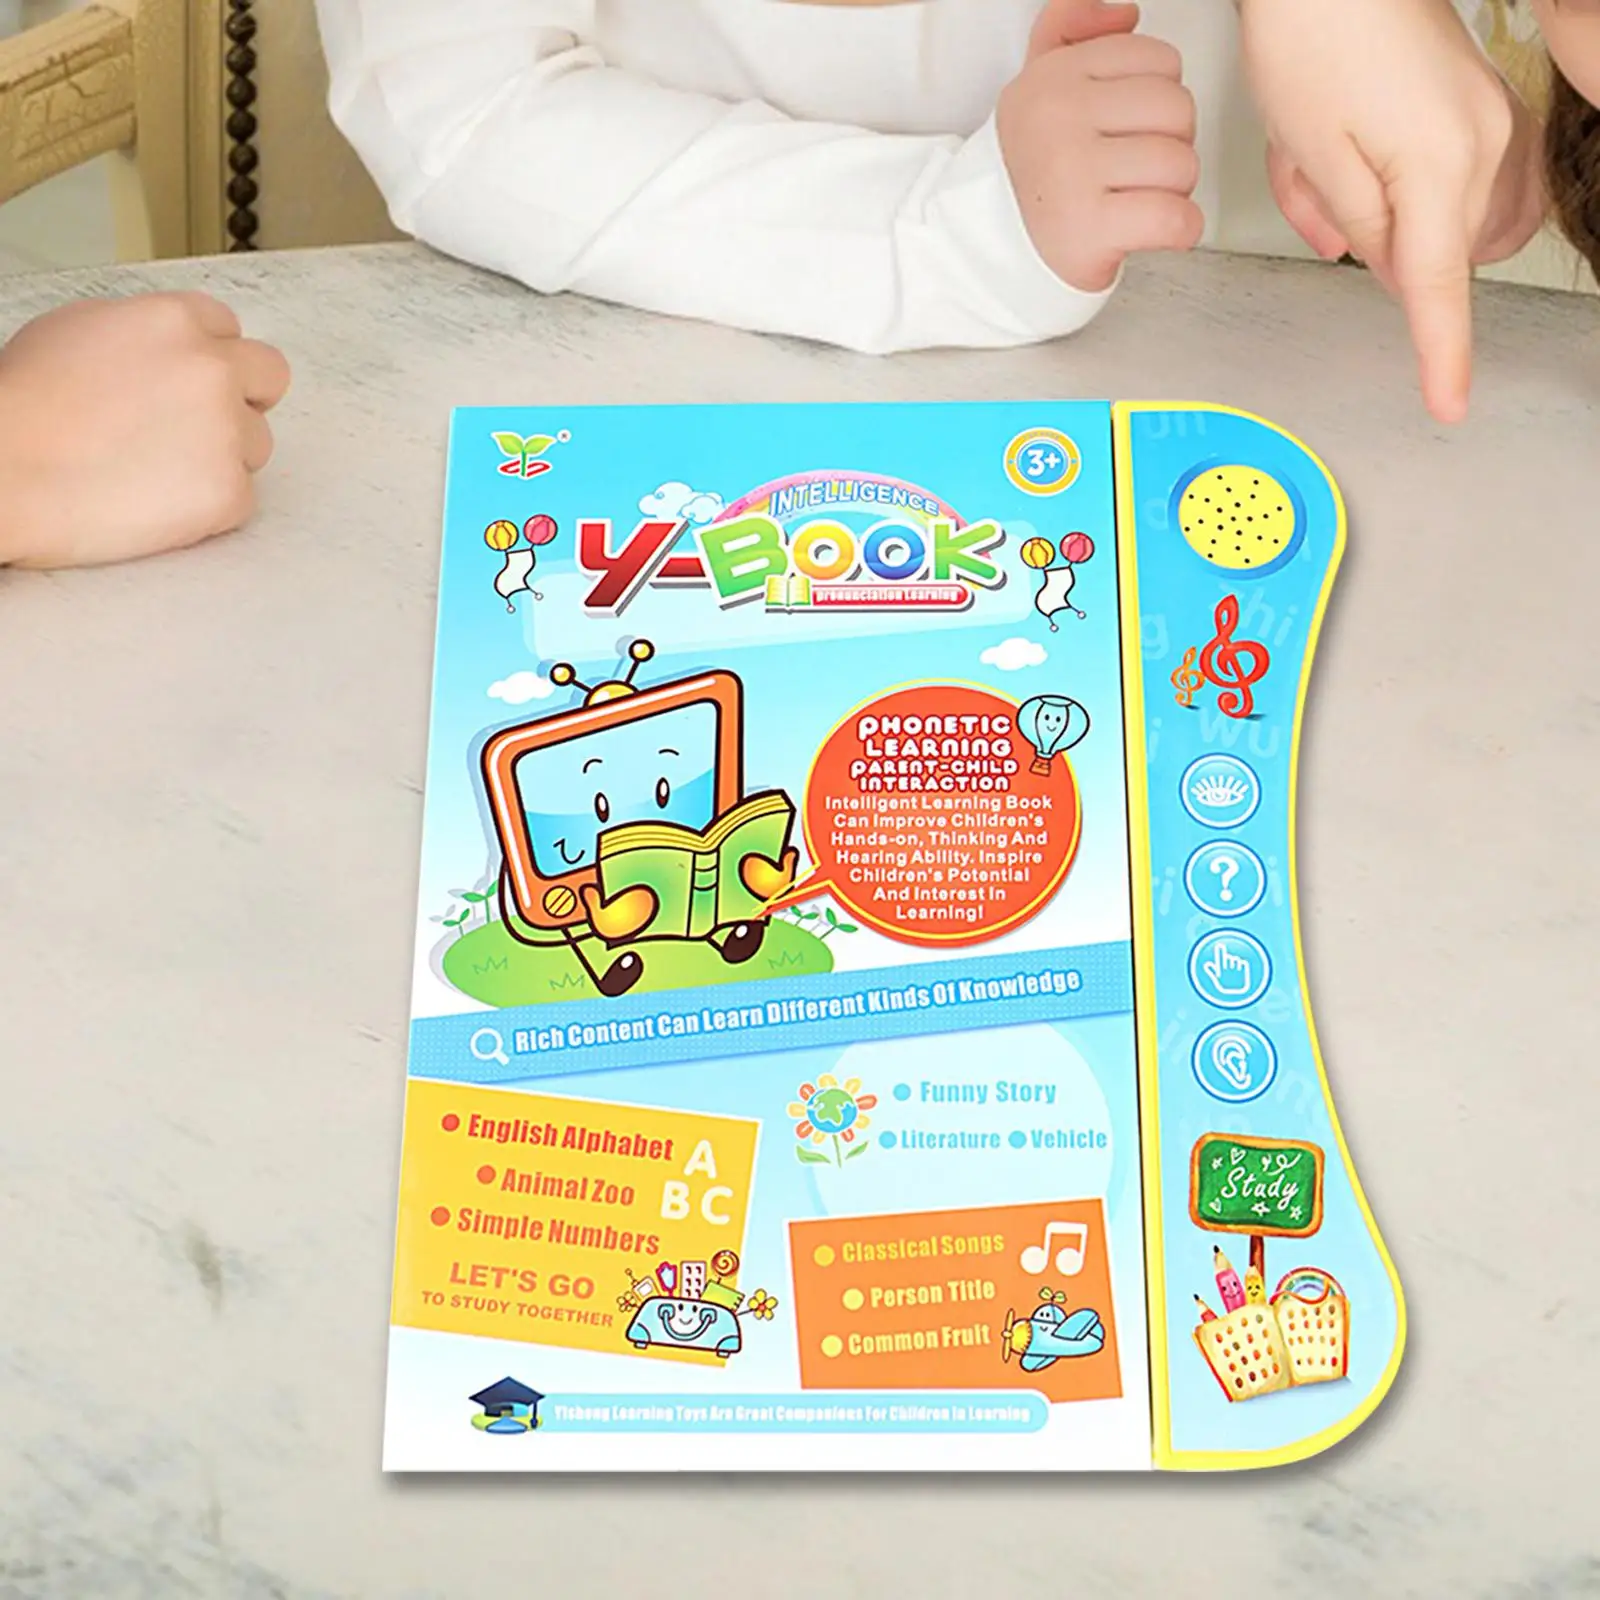 Interactive Children sound book Learning Alphabet sound book for Baby for Language Character Appellation Fruit Transportation